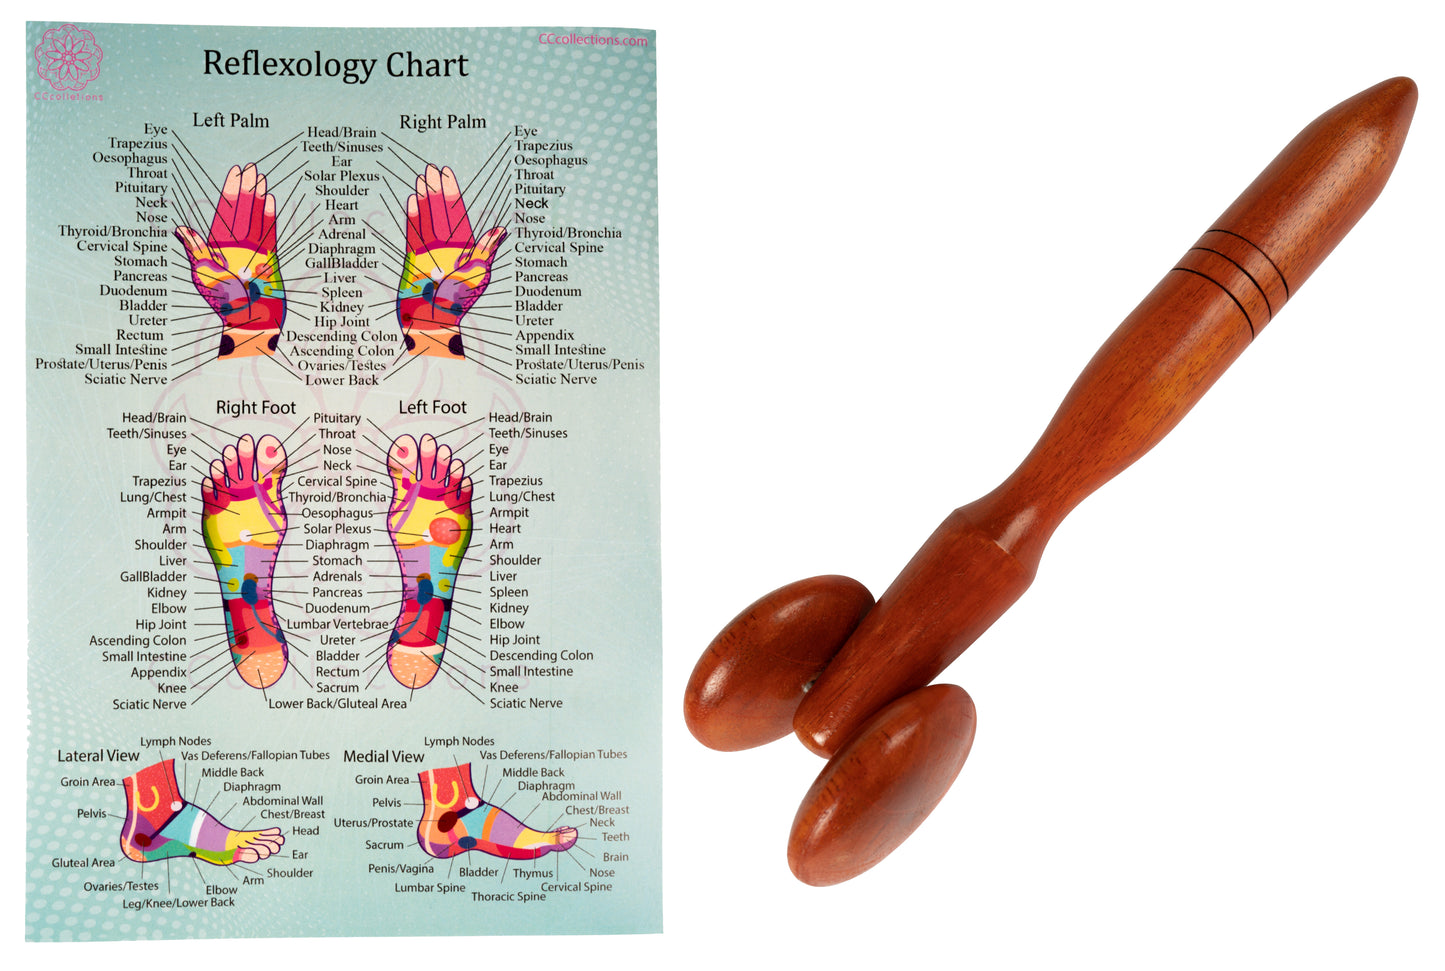 Versatile Wooden Manual Massage Tool Sets for professionals with ENGLISH Reflexology Charts - CCcollections - CCCollections